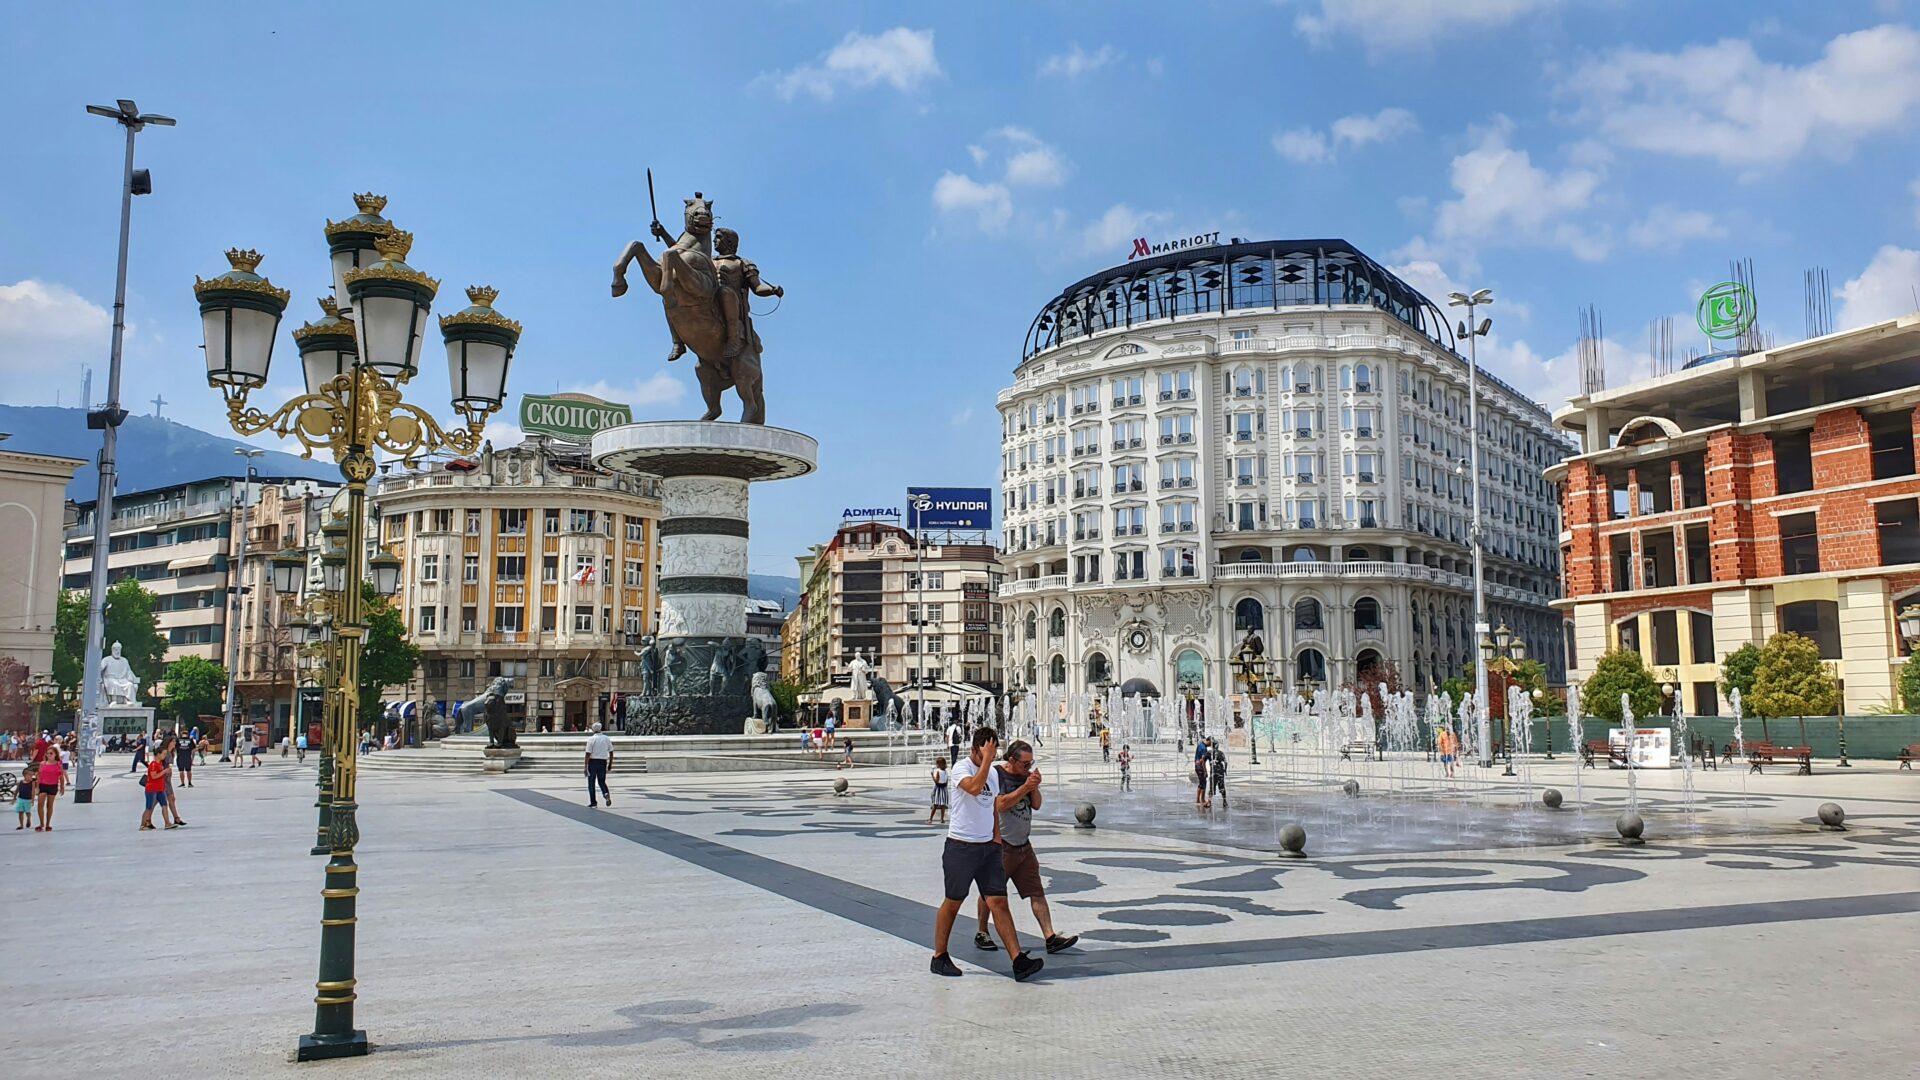 The then Macedonian government erected statues and other architectural projects to distance the country from its communist past (Pavol Svantner via Unsplash)